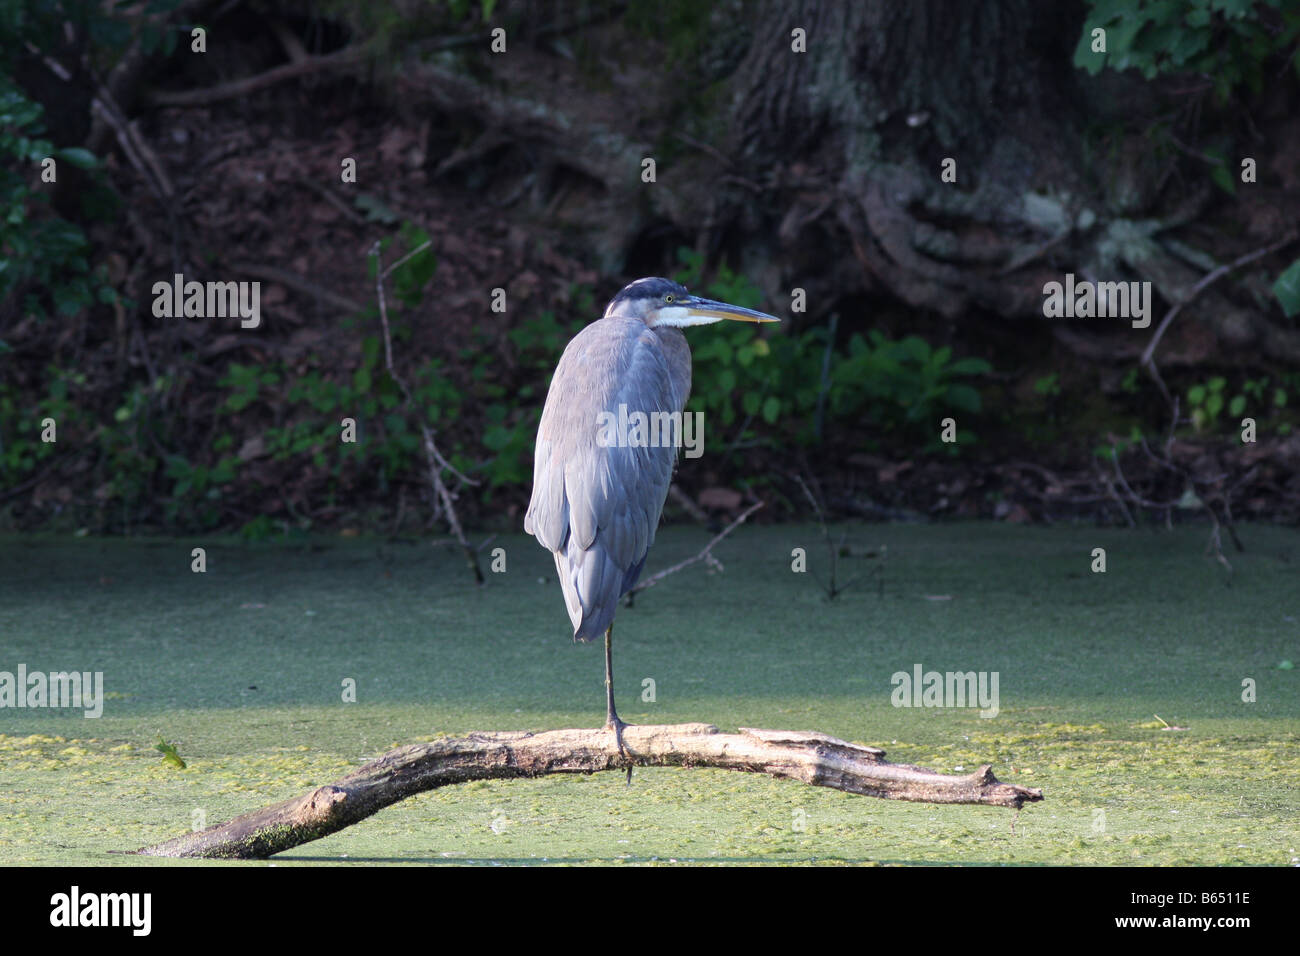 A Great Blue Heron perched on piece of drift wood in a pond. Marshy river scene. Stock Photo